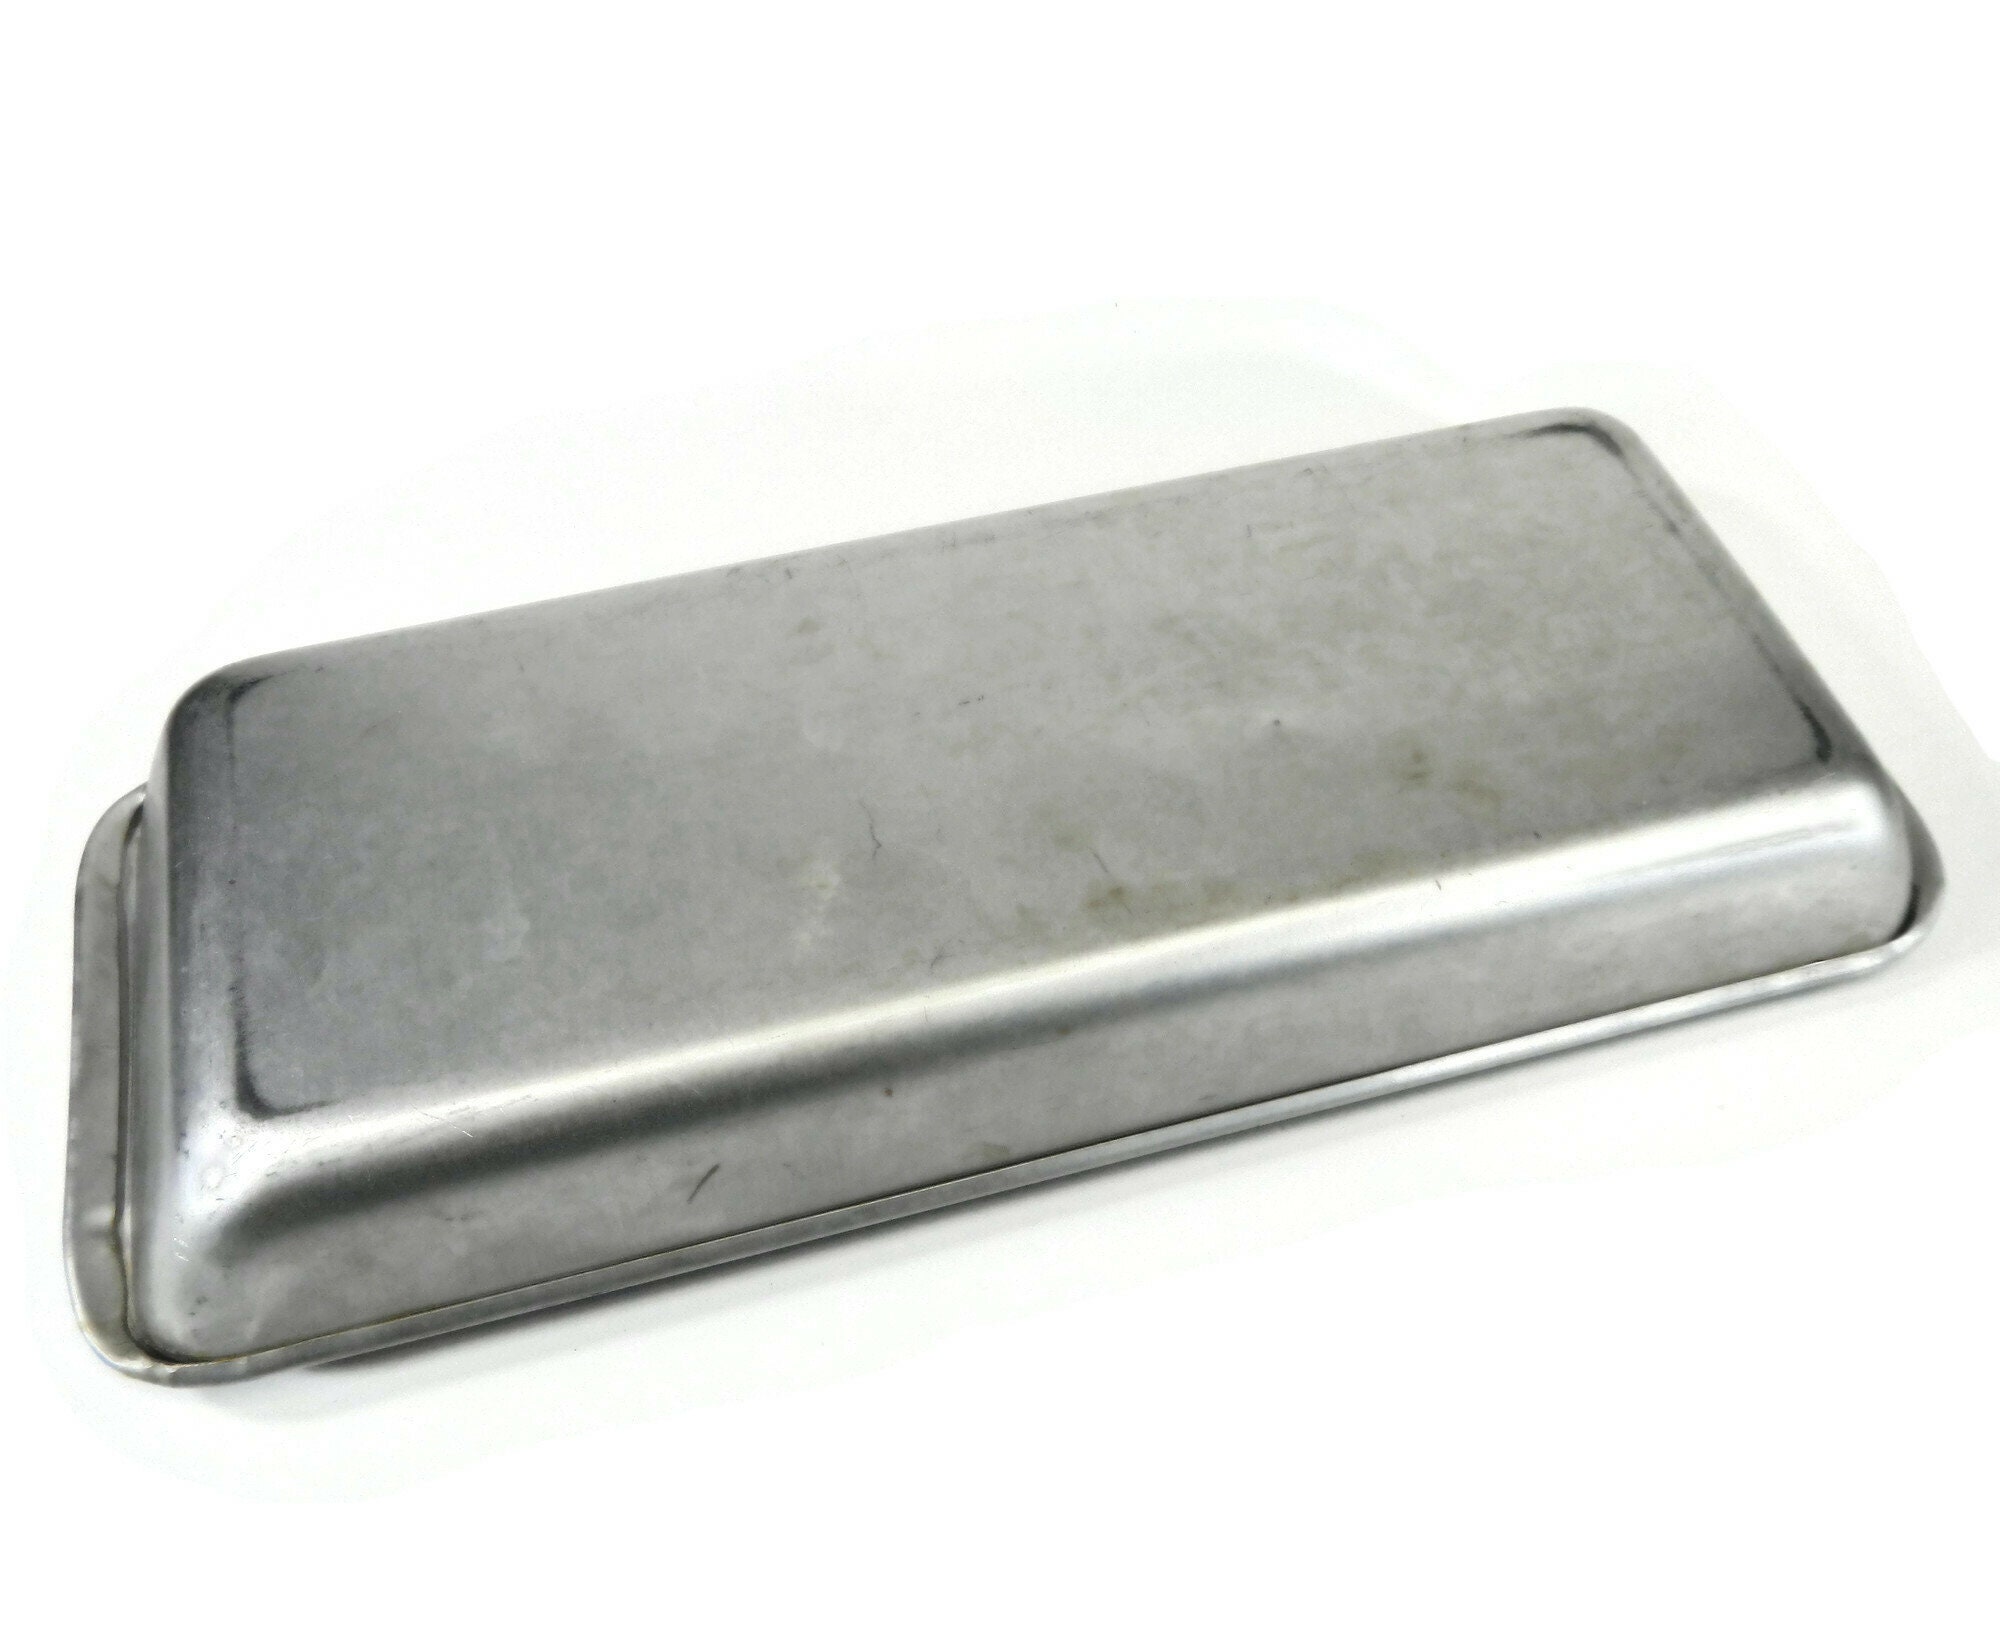 Vintage 1950's Aluminum Metal Ice Tray With Easy Release Handle Set Of –  Shop Cool Vintage Decor